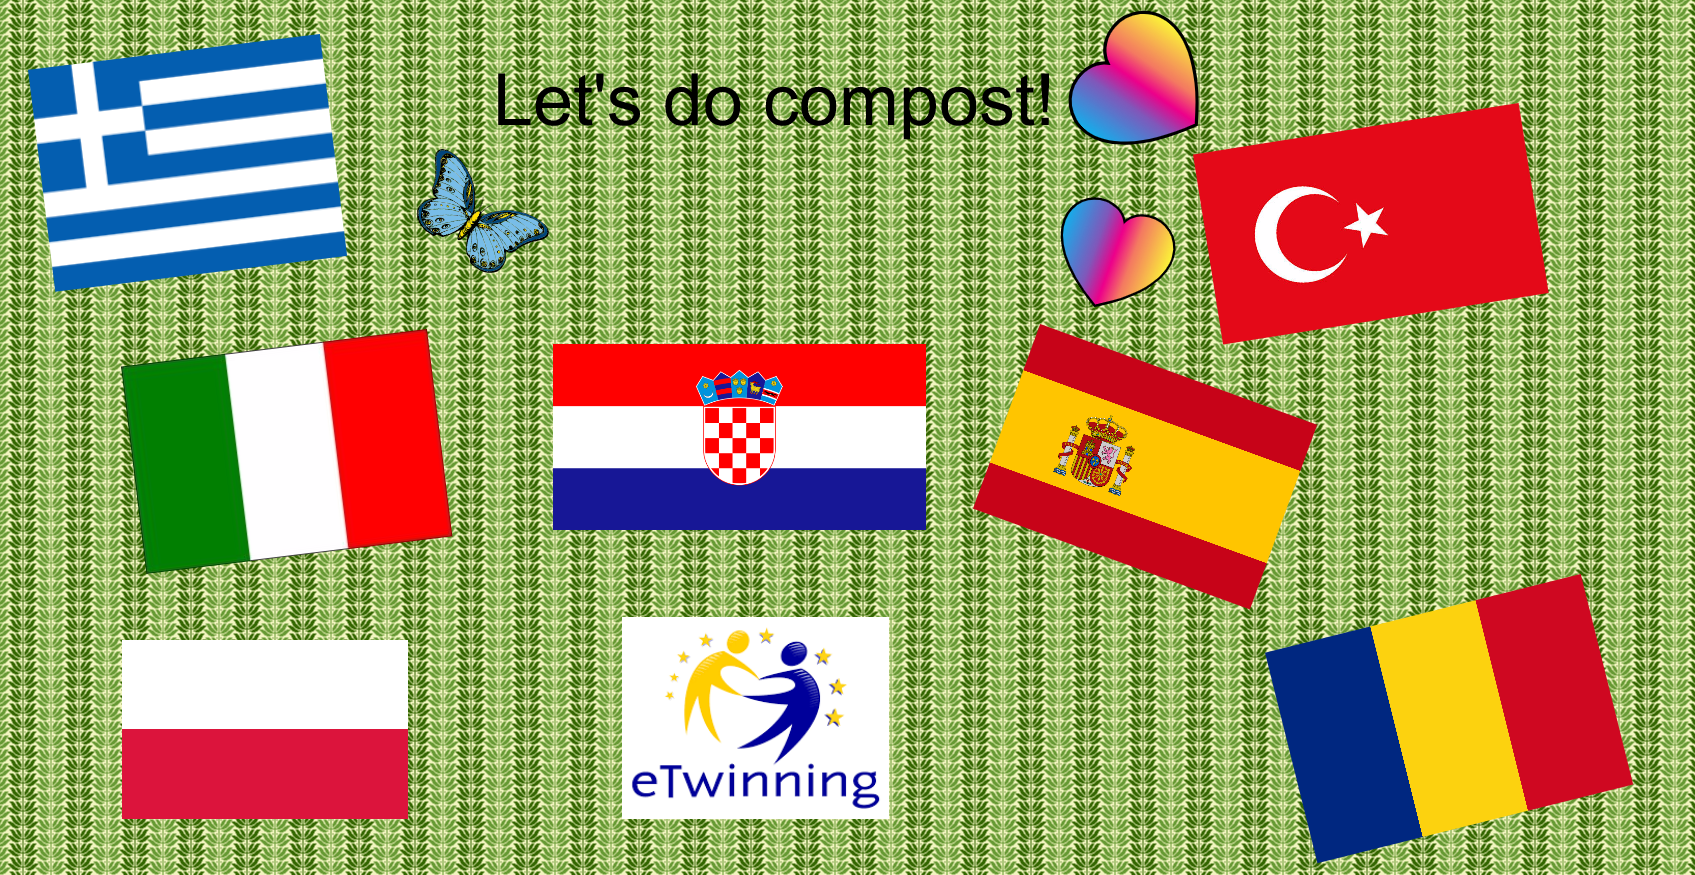 eTwinning project Let's do compost!